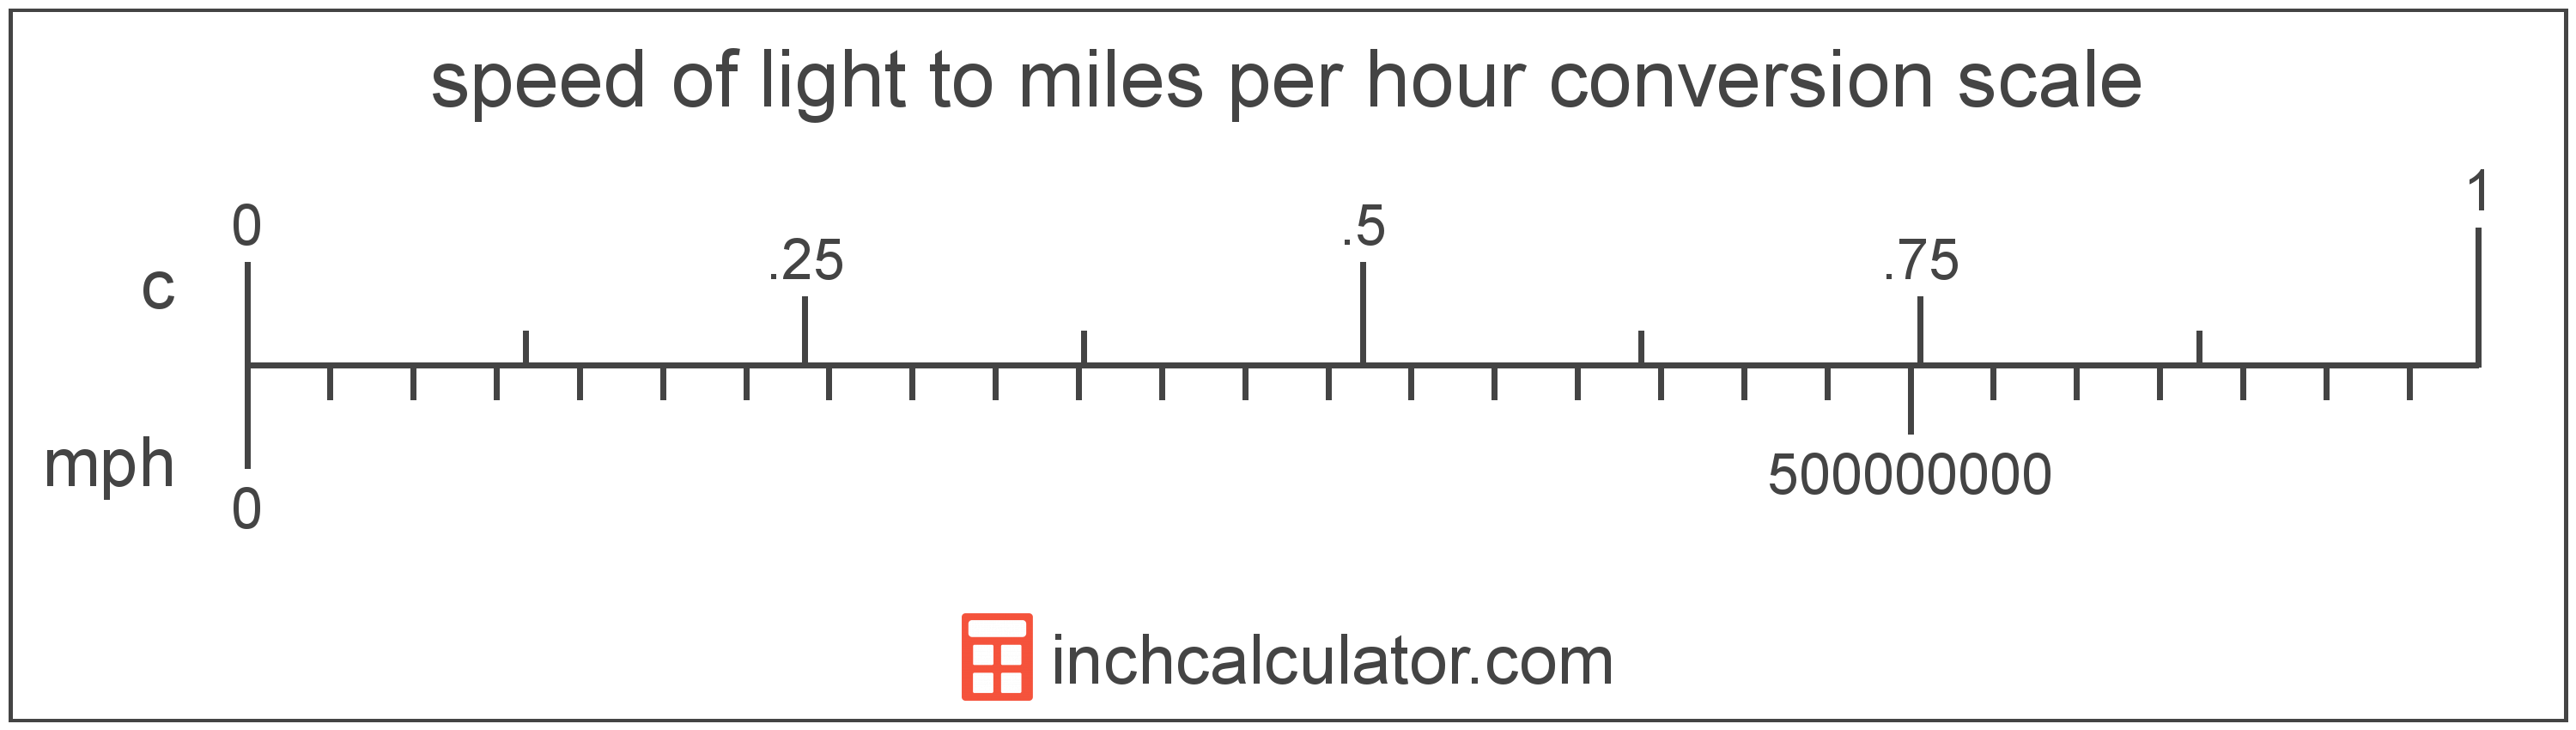 conversion scale showing miles per hour and equivalent speed of light speed values